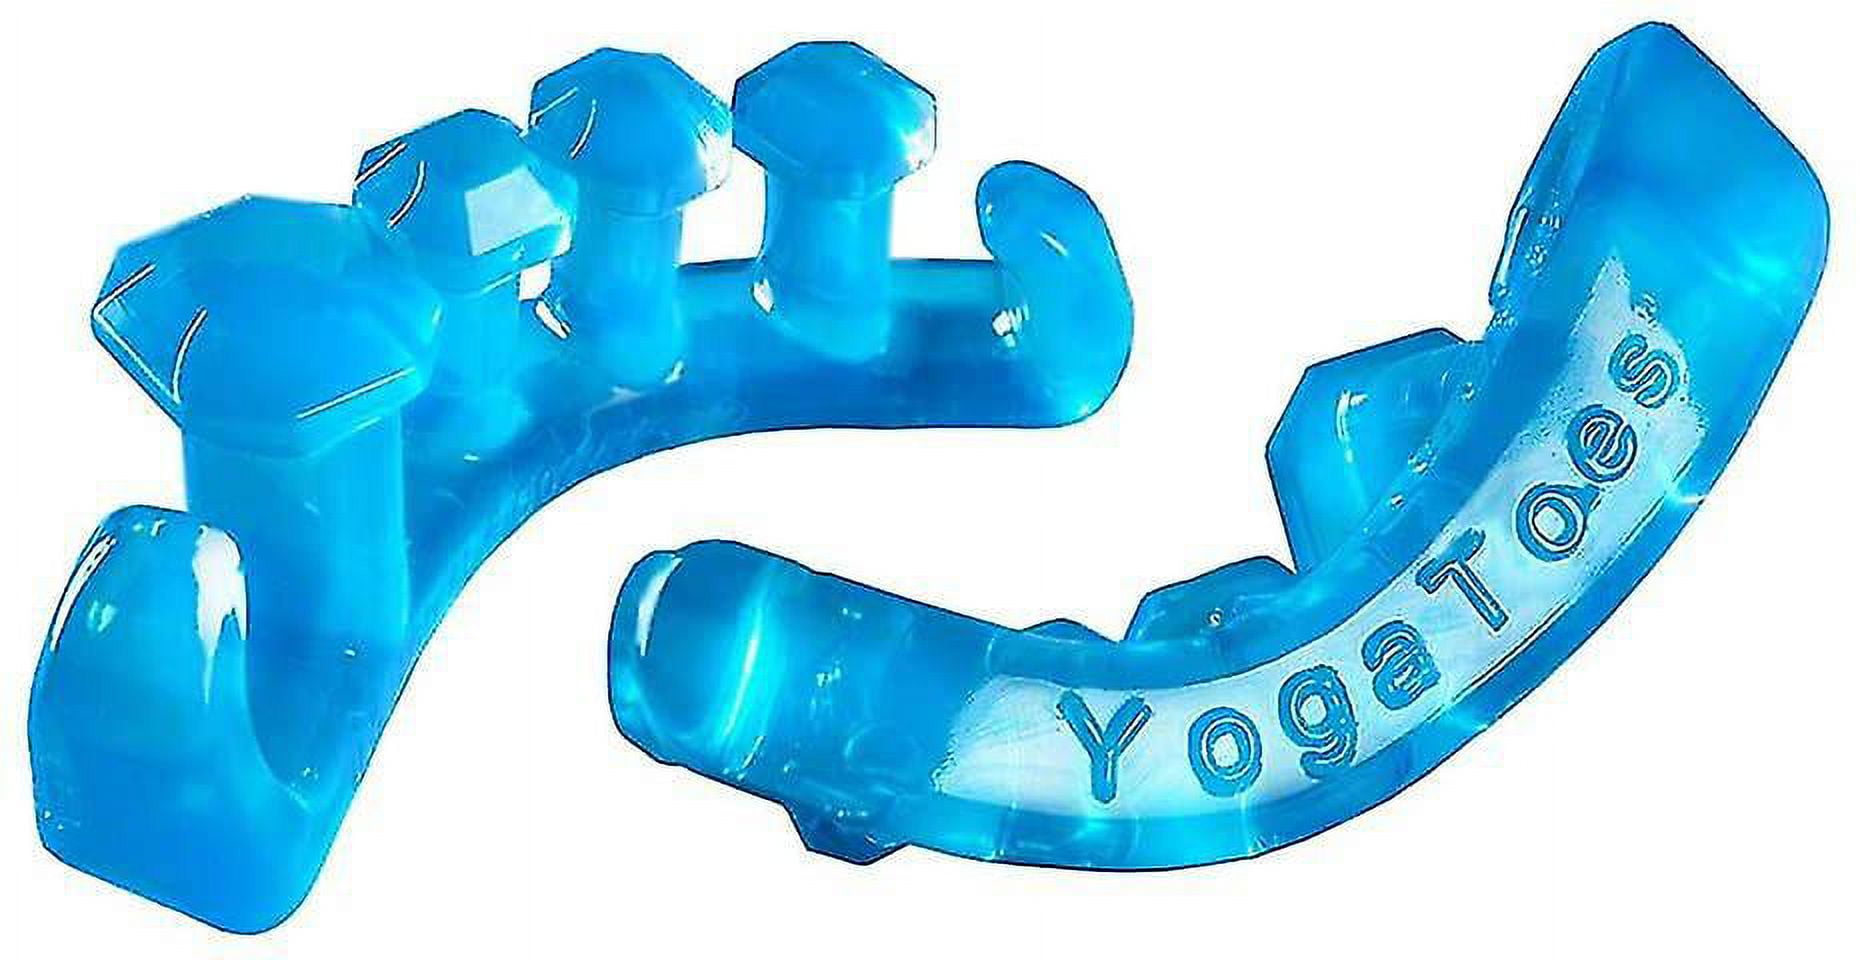 Yogatoes Gems: Gel Toe Stretcher & Toe Separator - Choice For Fighting  Bunions,hammer Toes,& More!